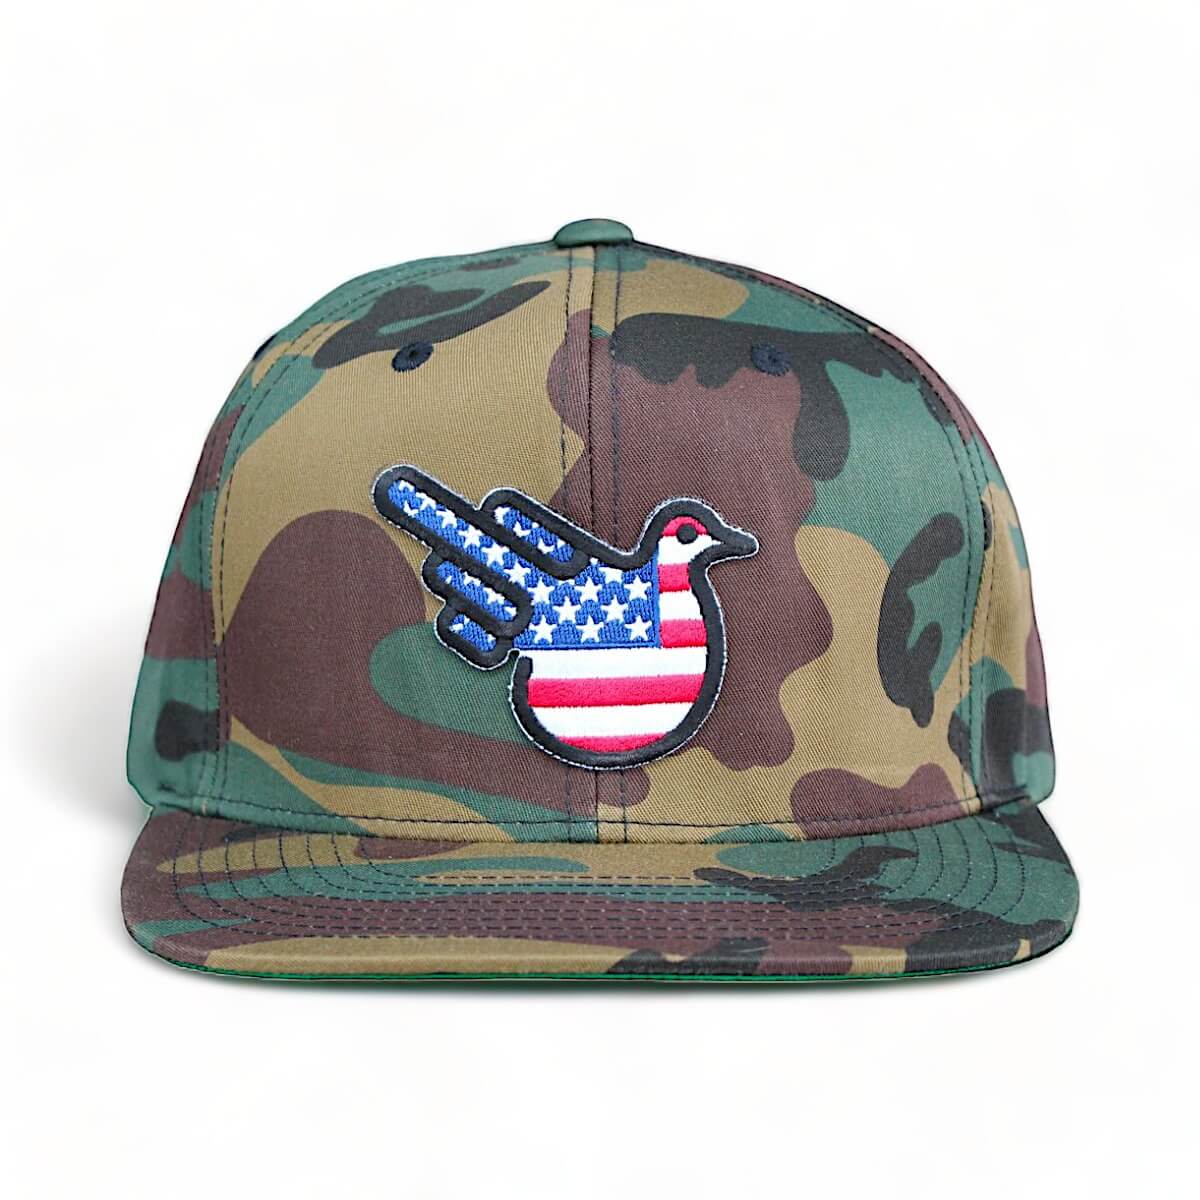 American Flag Snapback Hat - Order in Charcoal, Heather Grey, or Camo Camo